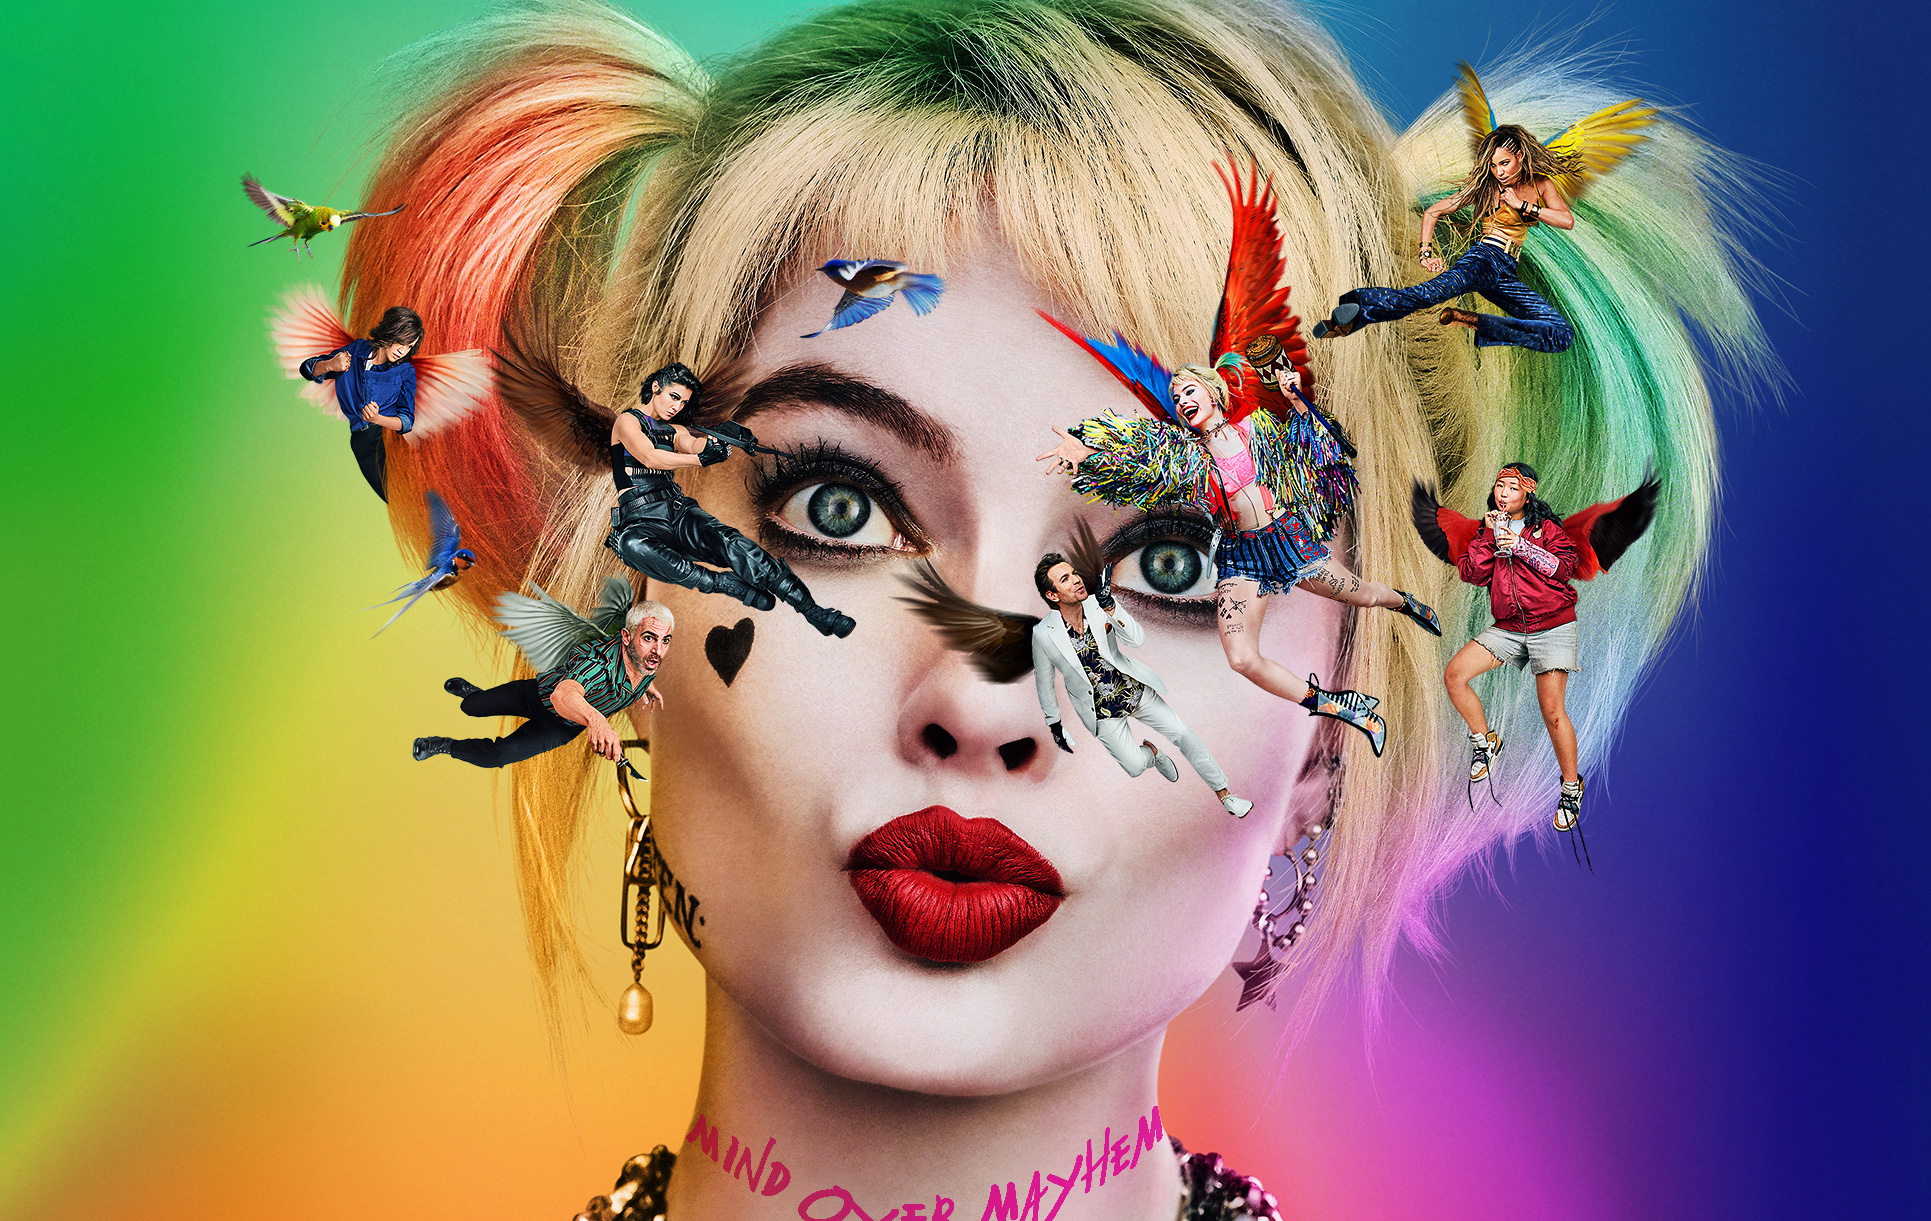 Birds of Prey poster delves into Harley Quinn's twisted mind.